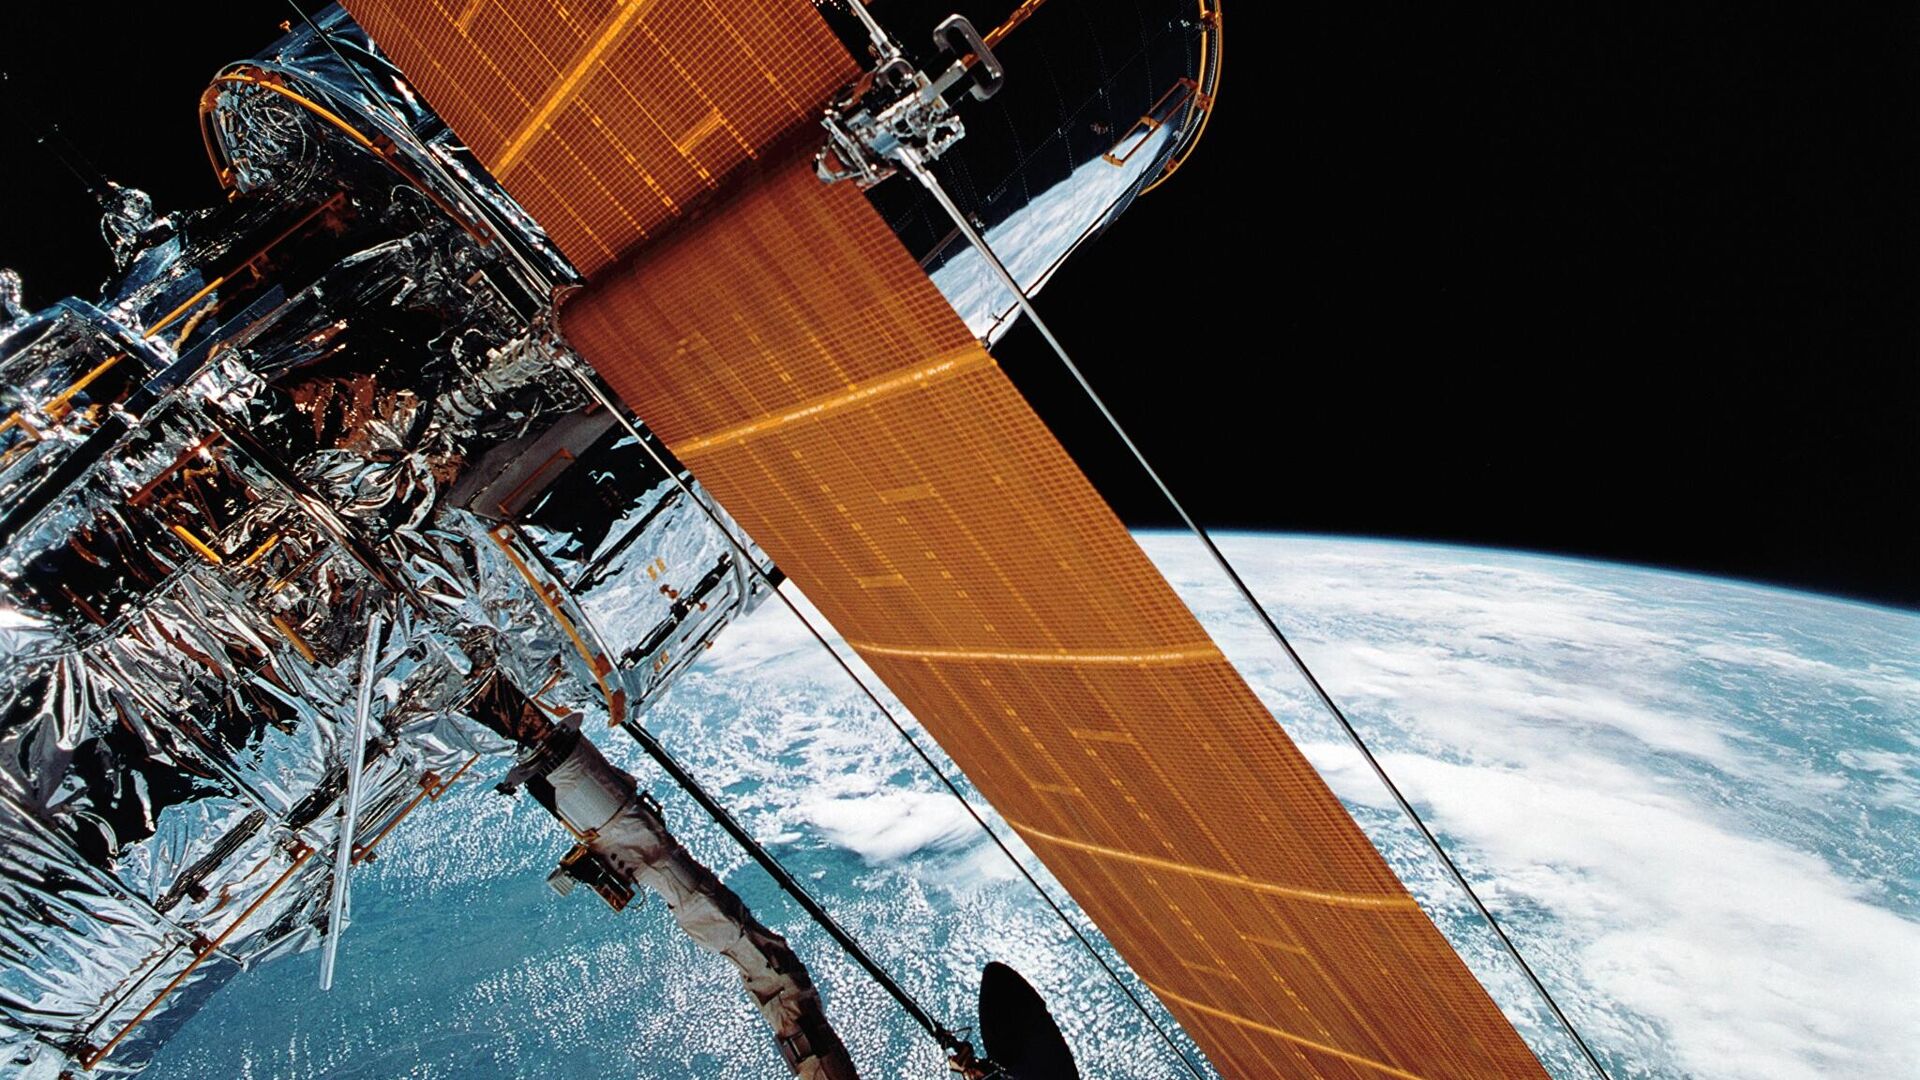 FILE - In this April 25, 1990 photograph provided by NASA, most of the giant Hubble Space Telescope can be seen as it is suspended in space by Discovery's Remote Manipulator System (RMS) following the deployment of part of its solar panels and antennae.   The Hubble Space Telescope should be back in action soon, Friday, July 16, 2021, following a tricky, remote repair job by NASA - Sputnik International, 1920, 24.02.2022